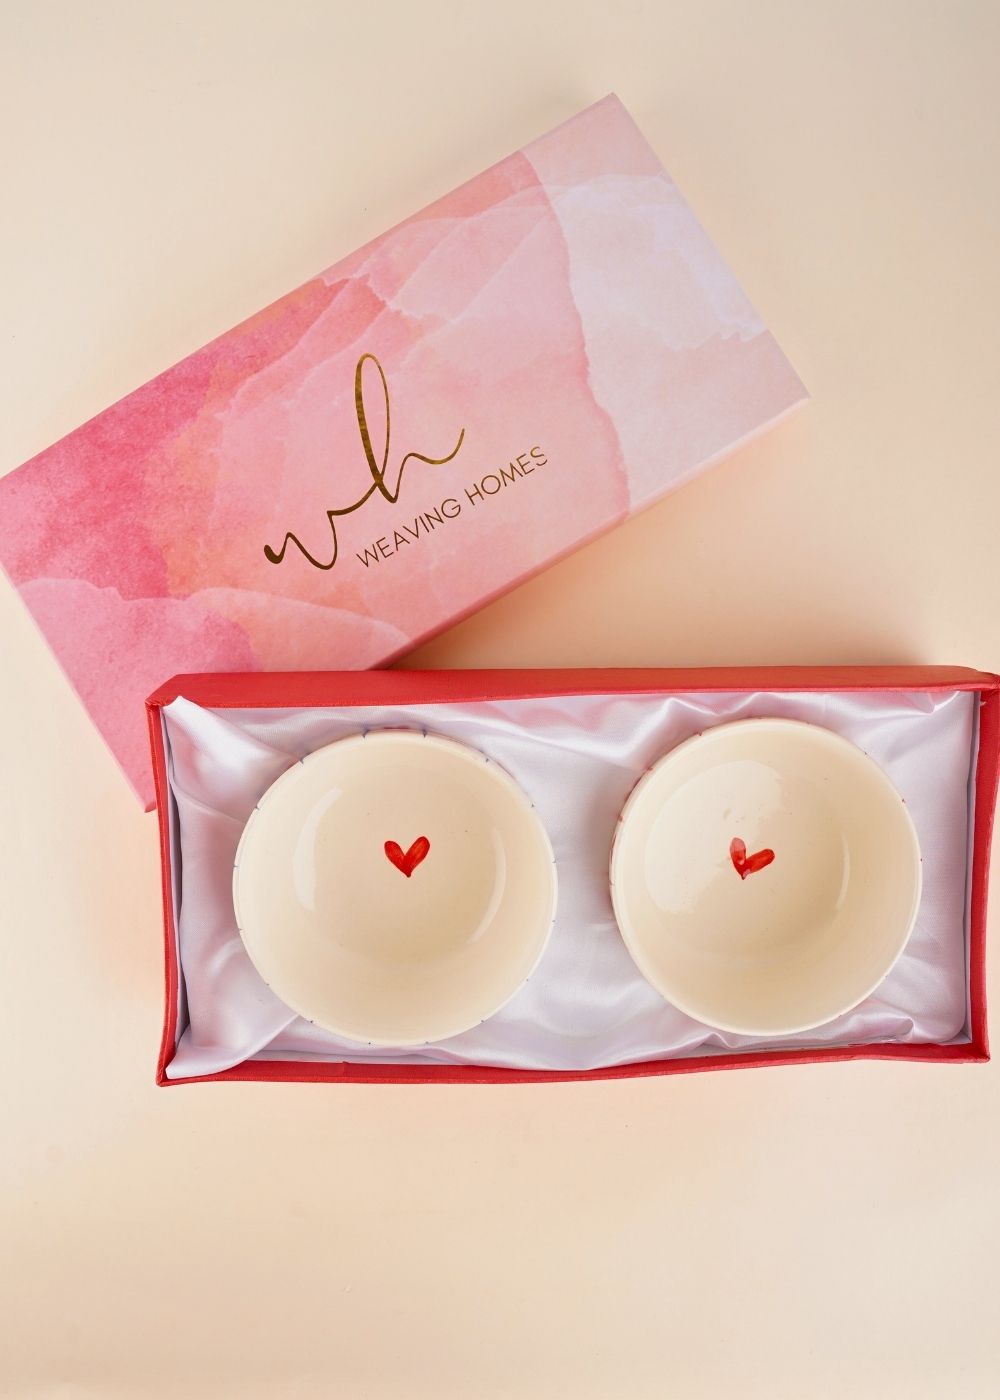 his & her heart bowl in a gift box handmade in india